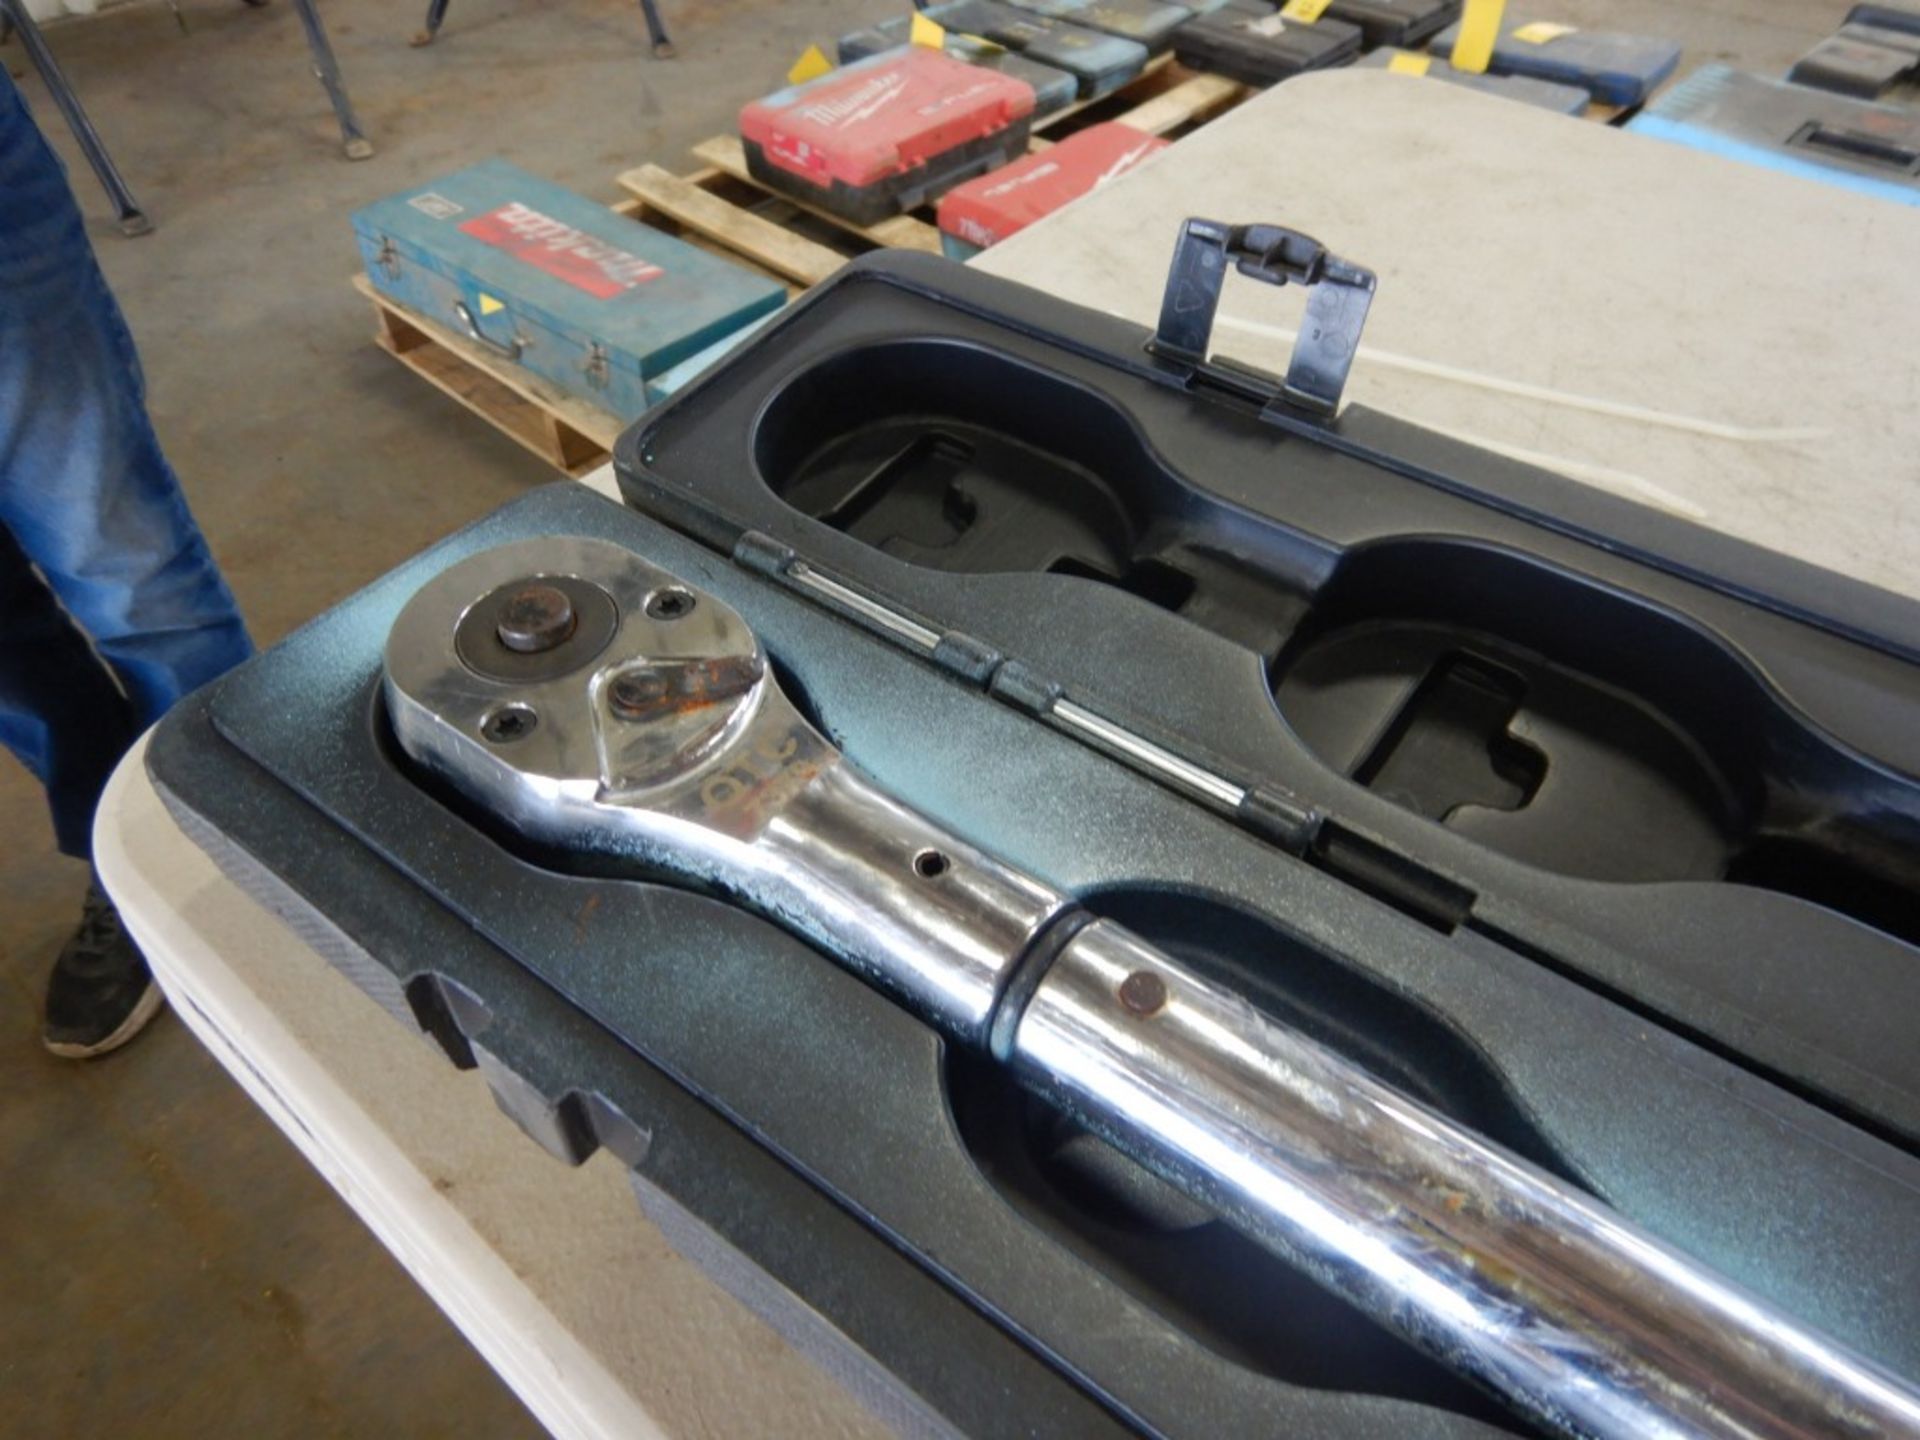 OTC 3/4 DRIVE TORQUE WRENCH, 100 - 600 FOOT LB - Image 2 of 2